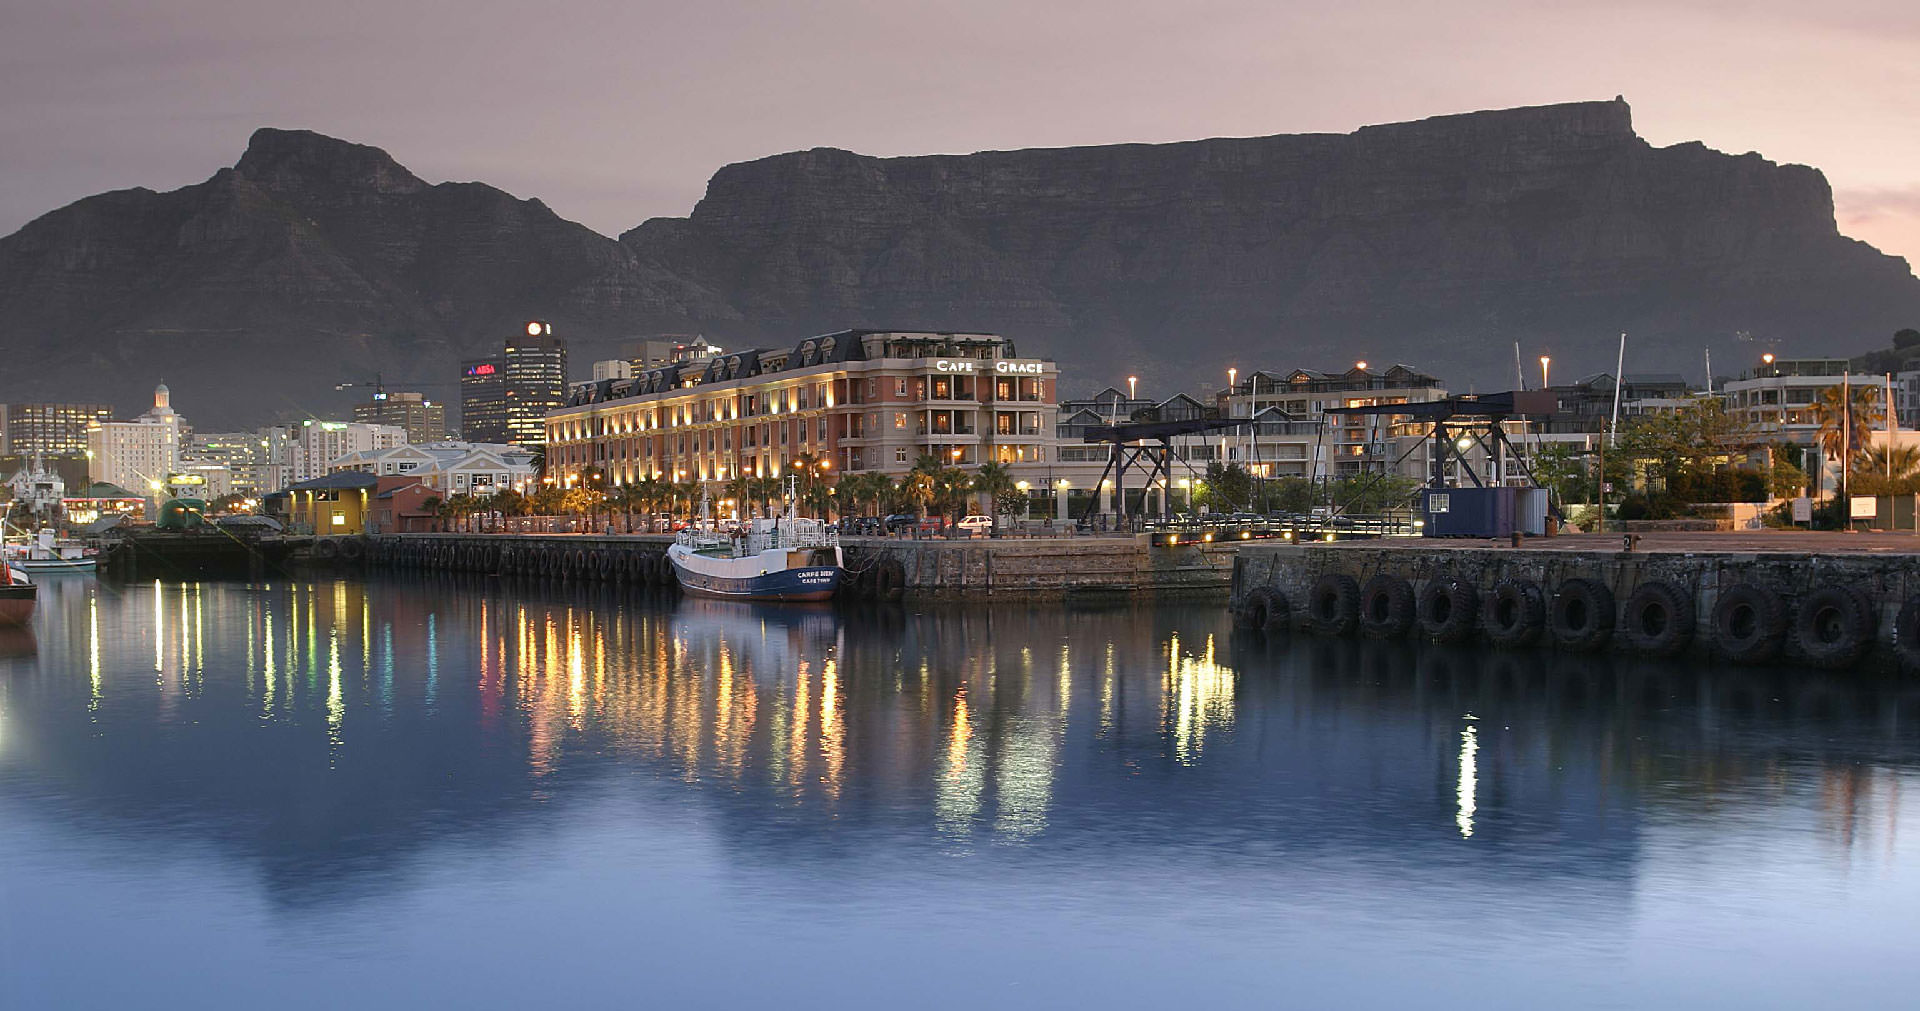 The V & A Waterfront and Cape Grace Hotel, Cape Town